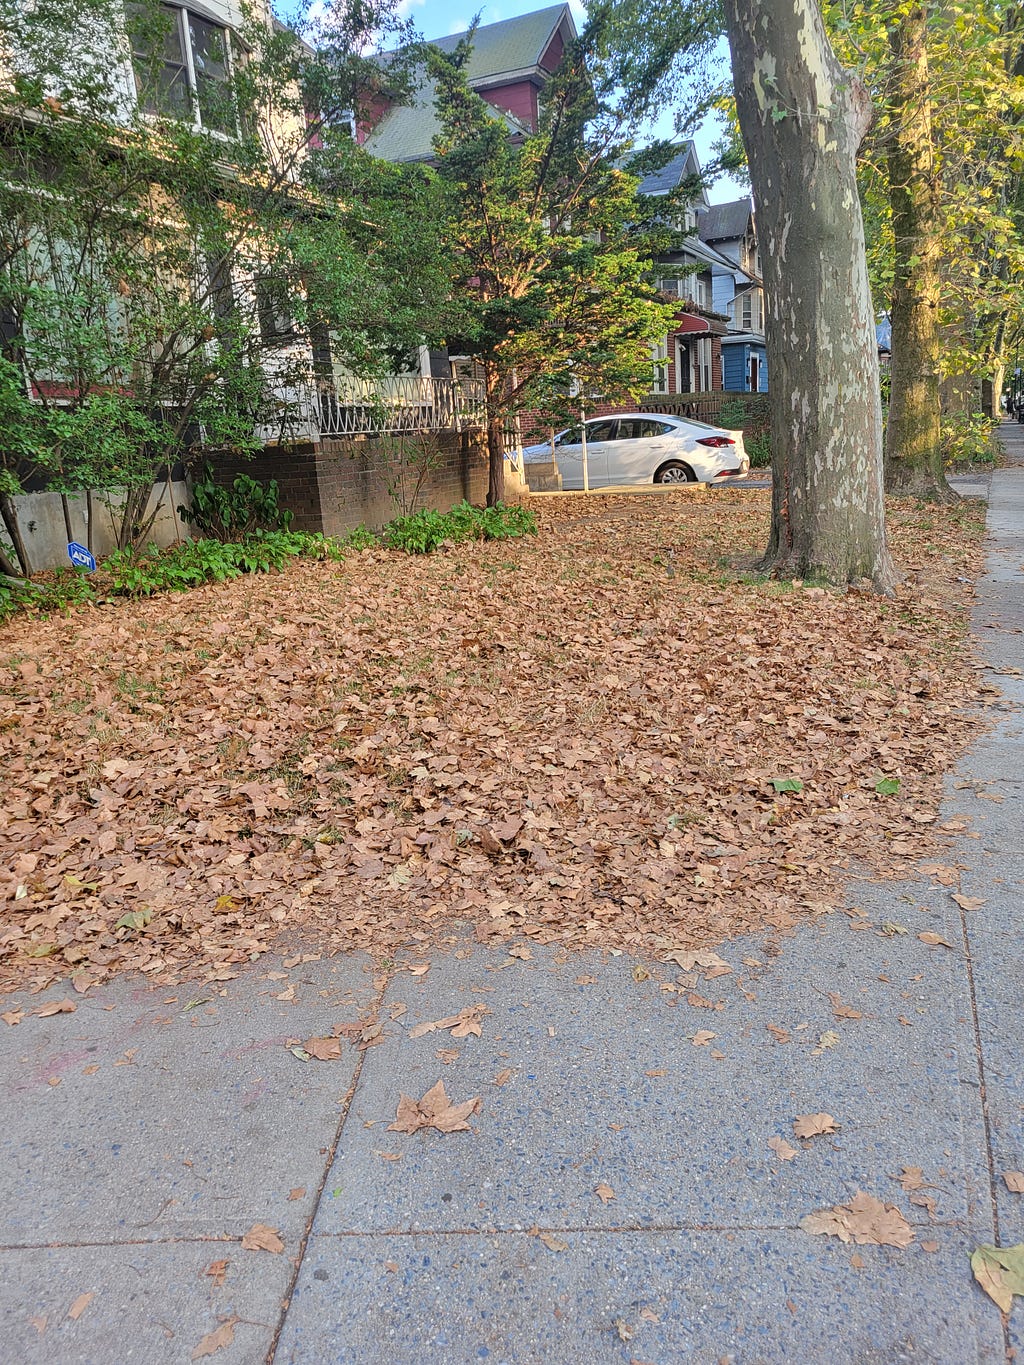 A front yard, completely covered by dead, brown leaves, August 8, 2022.